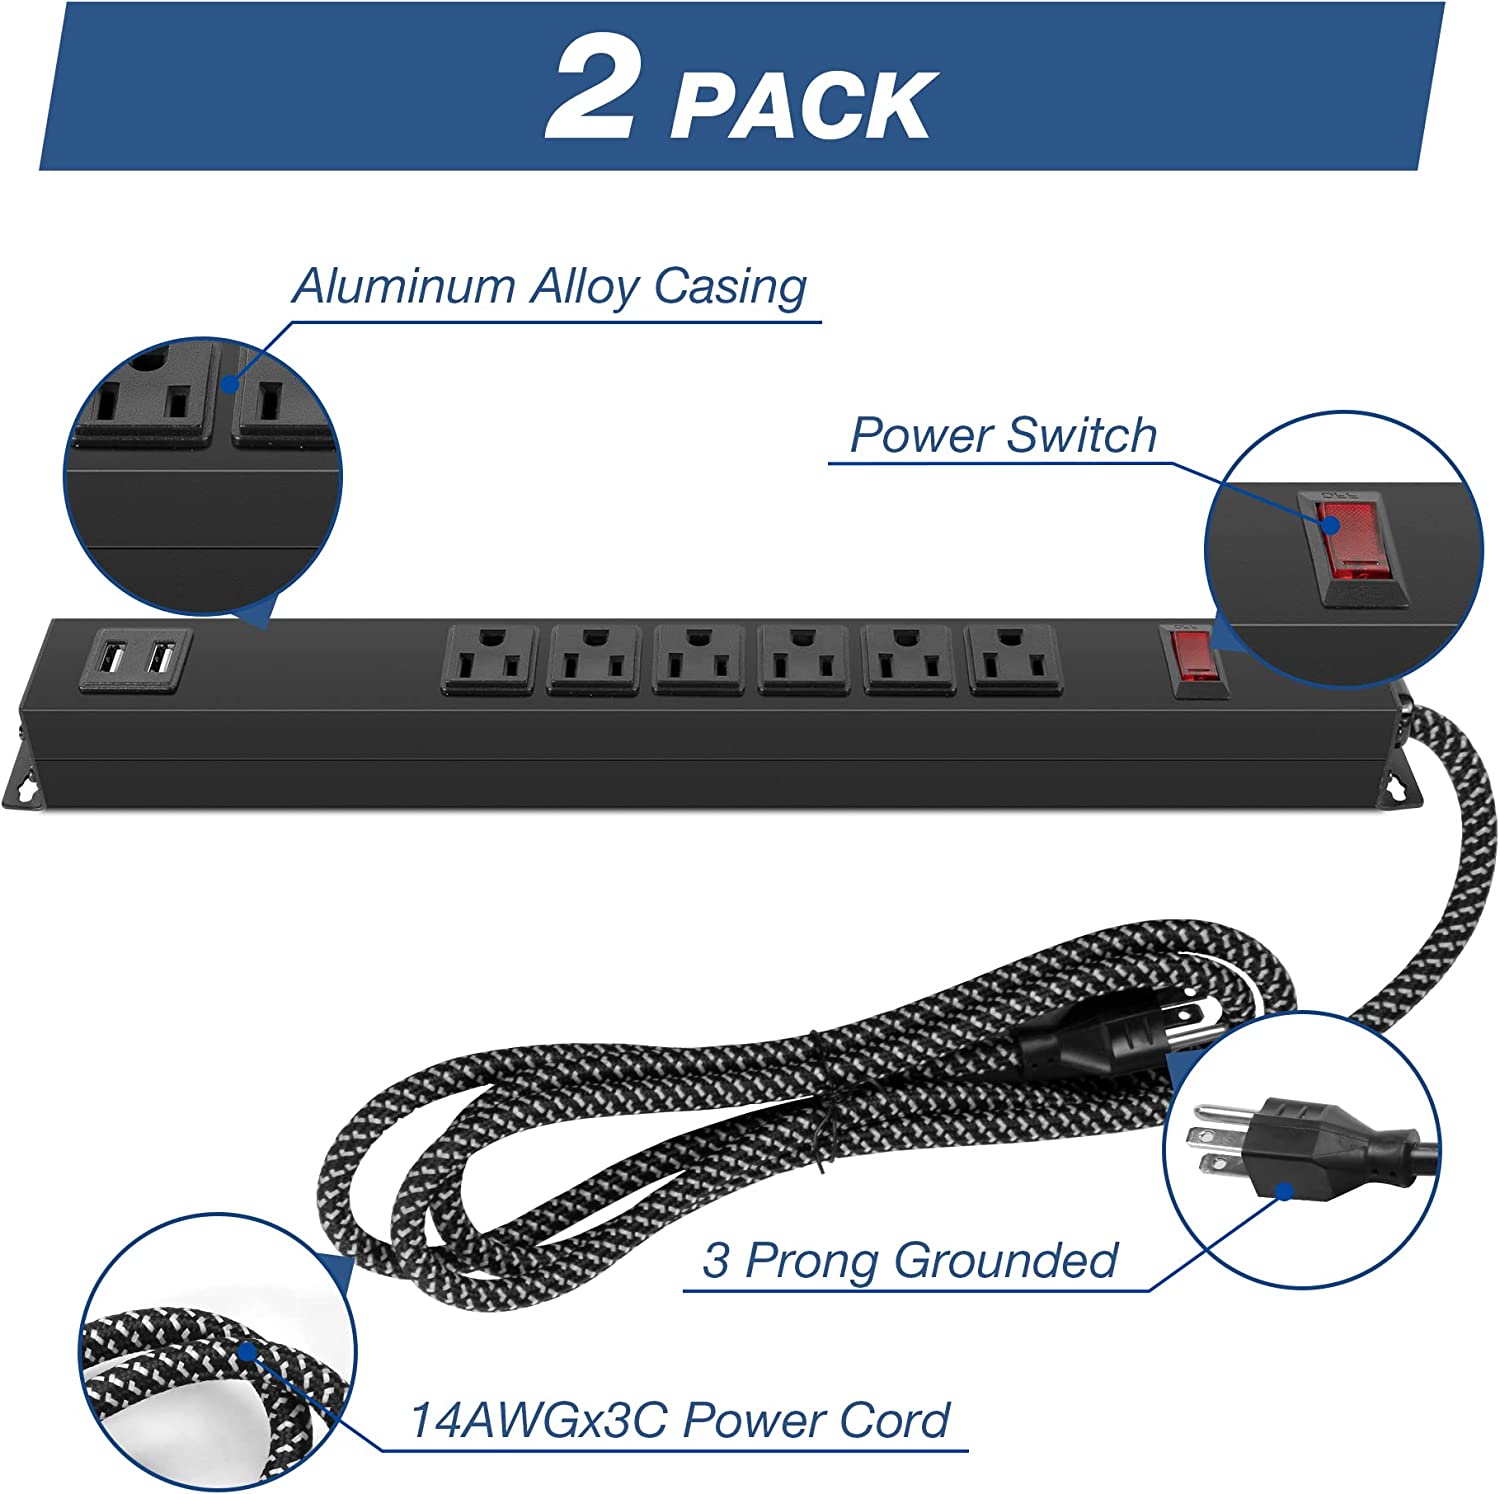 2 Pack Long Power Strip, 6 Metal Power Outlets 2 USB Ports, 6 ft Long Extension Cord with Hook & Loop, Black